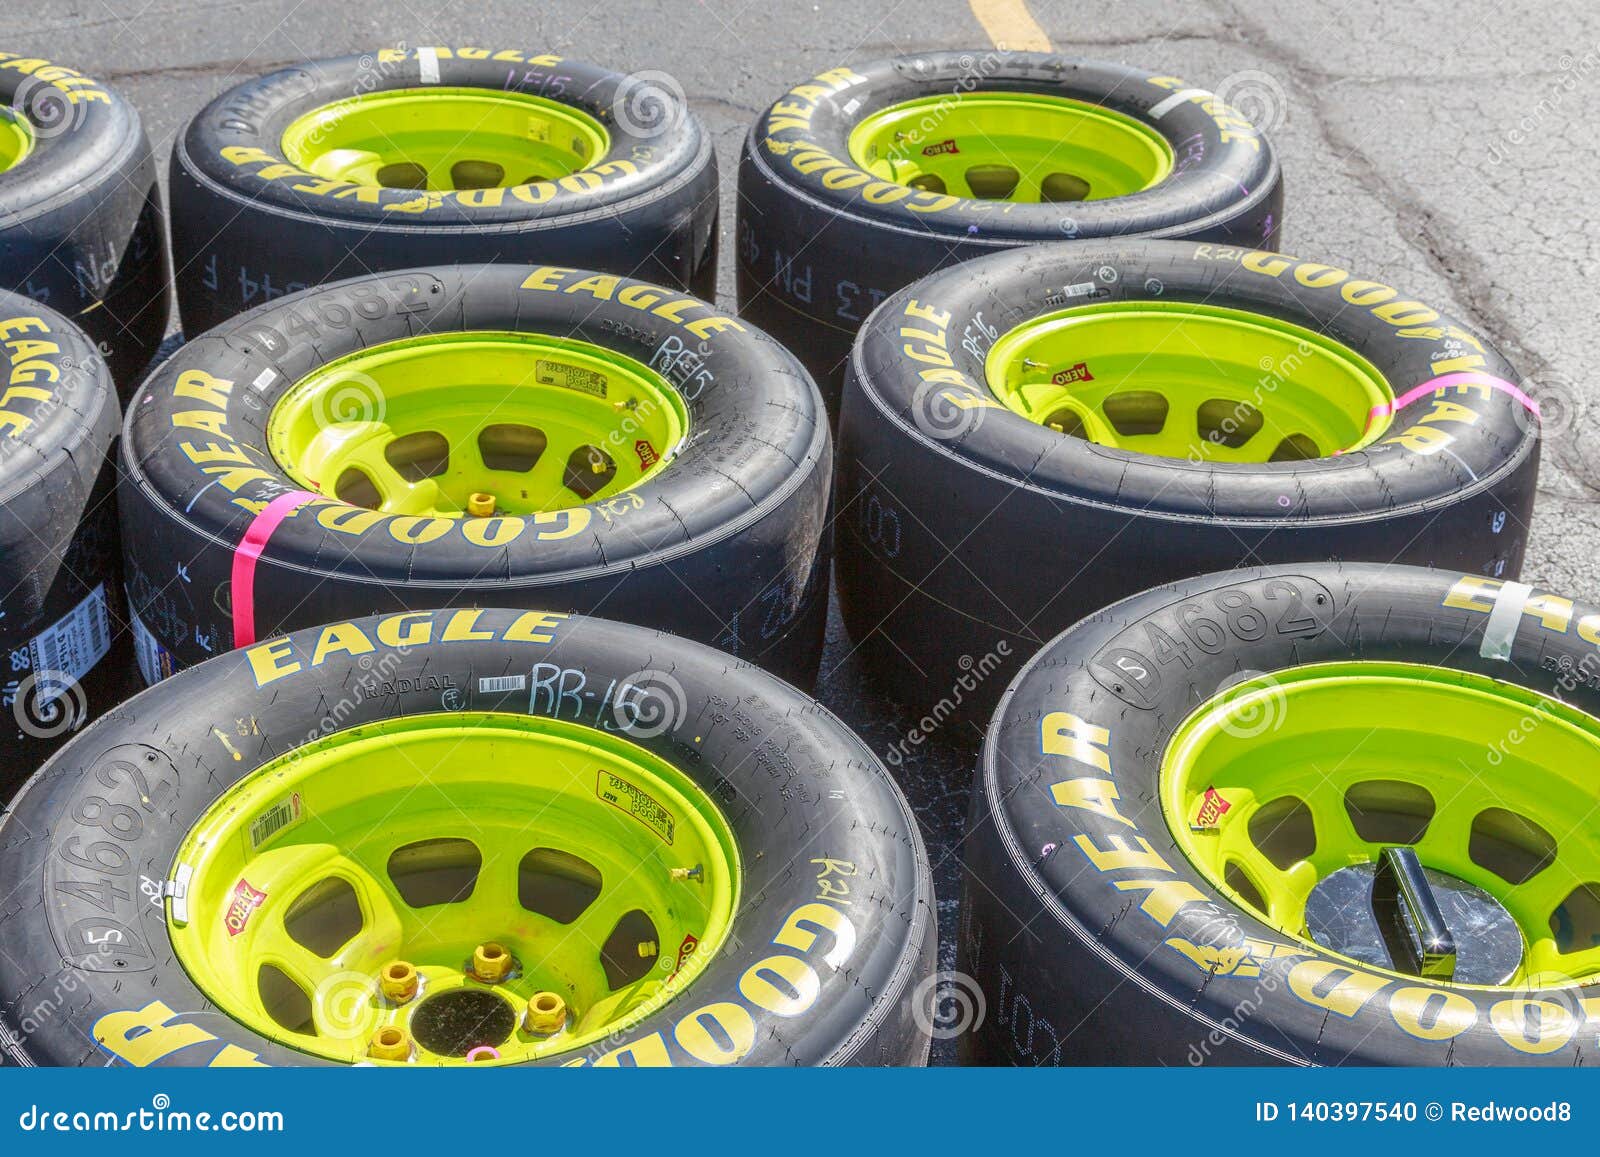 New Goodyear Eagle Racing Tires NASCAR Race Ready Editorial Image - Image  of pits, monster: 140397540